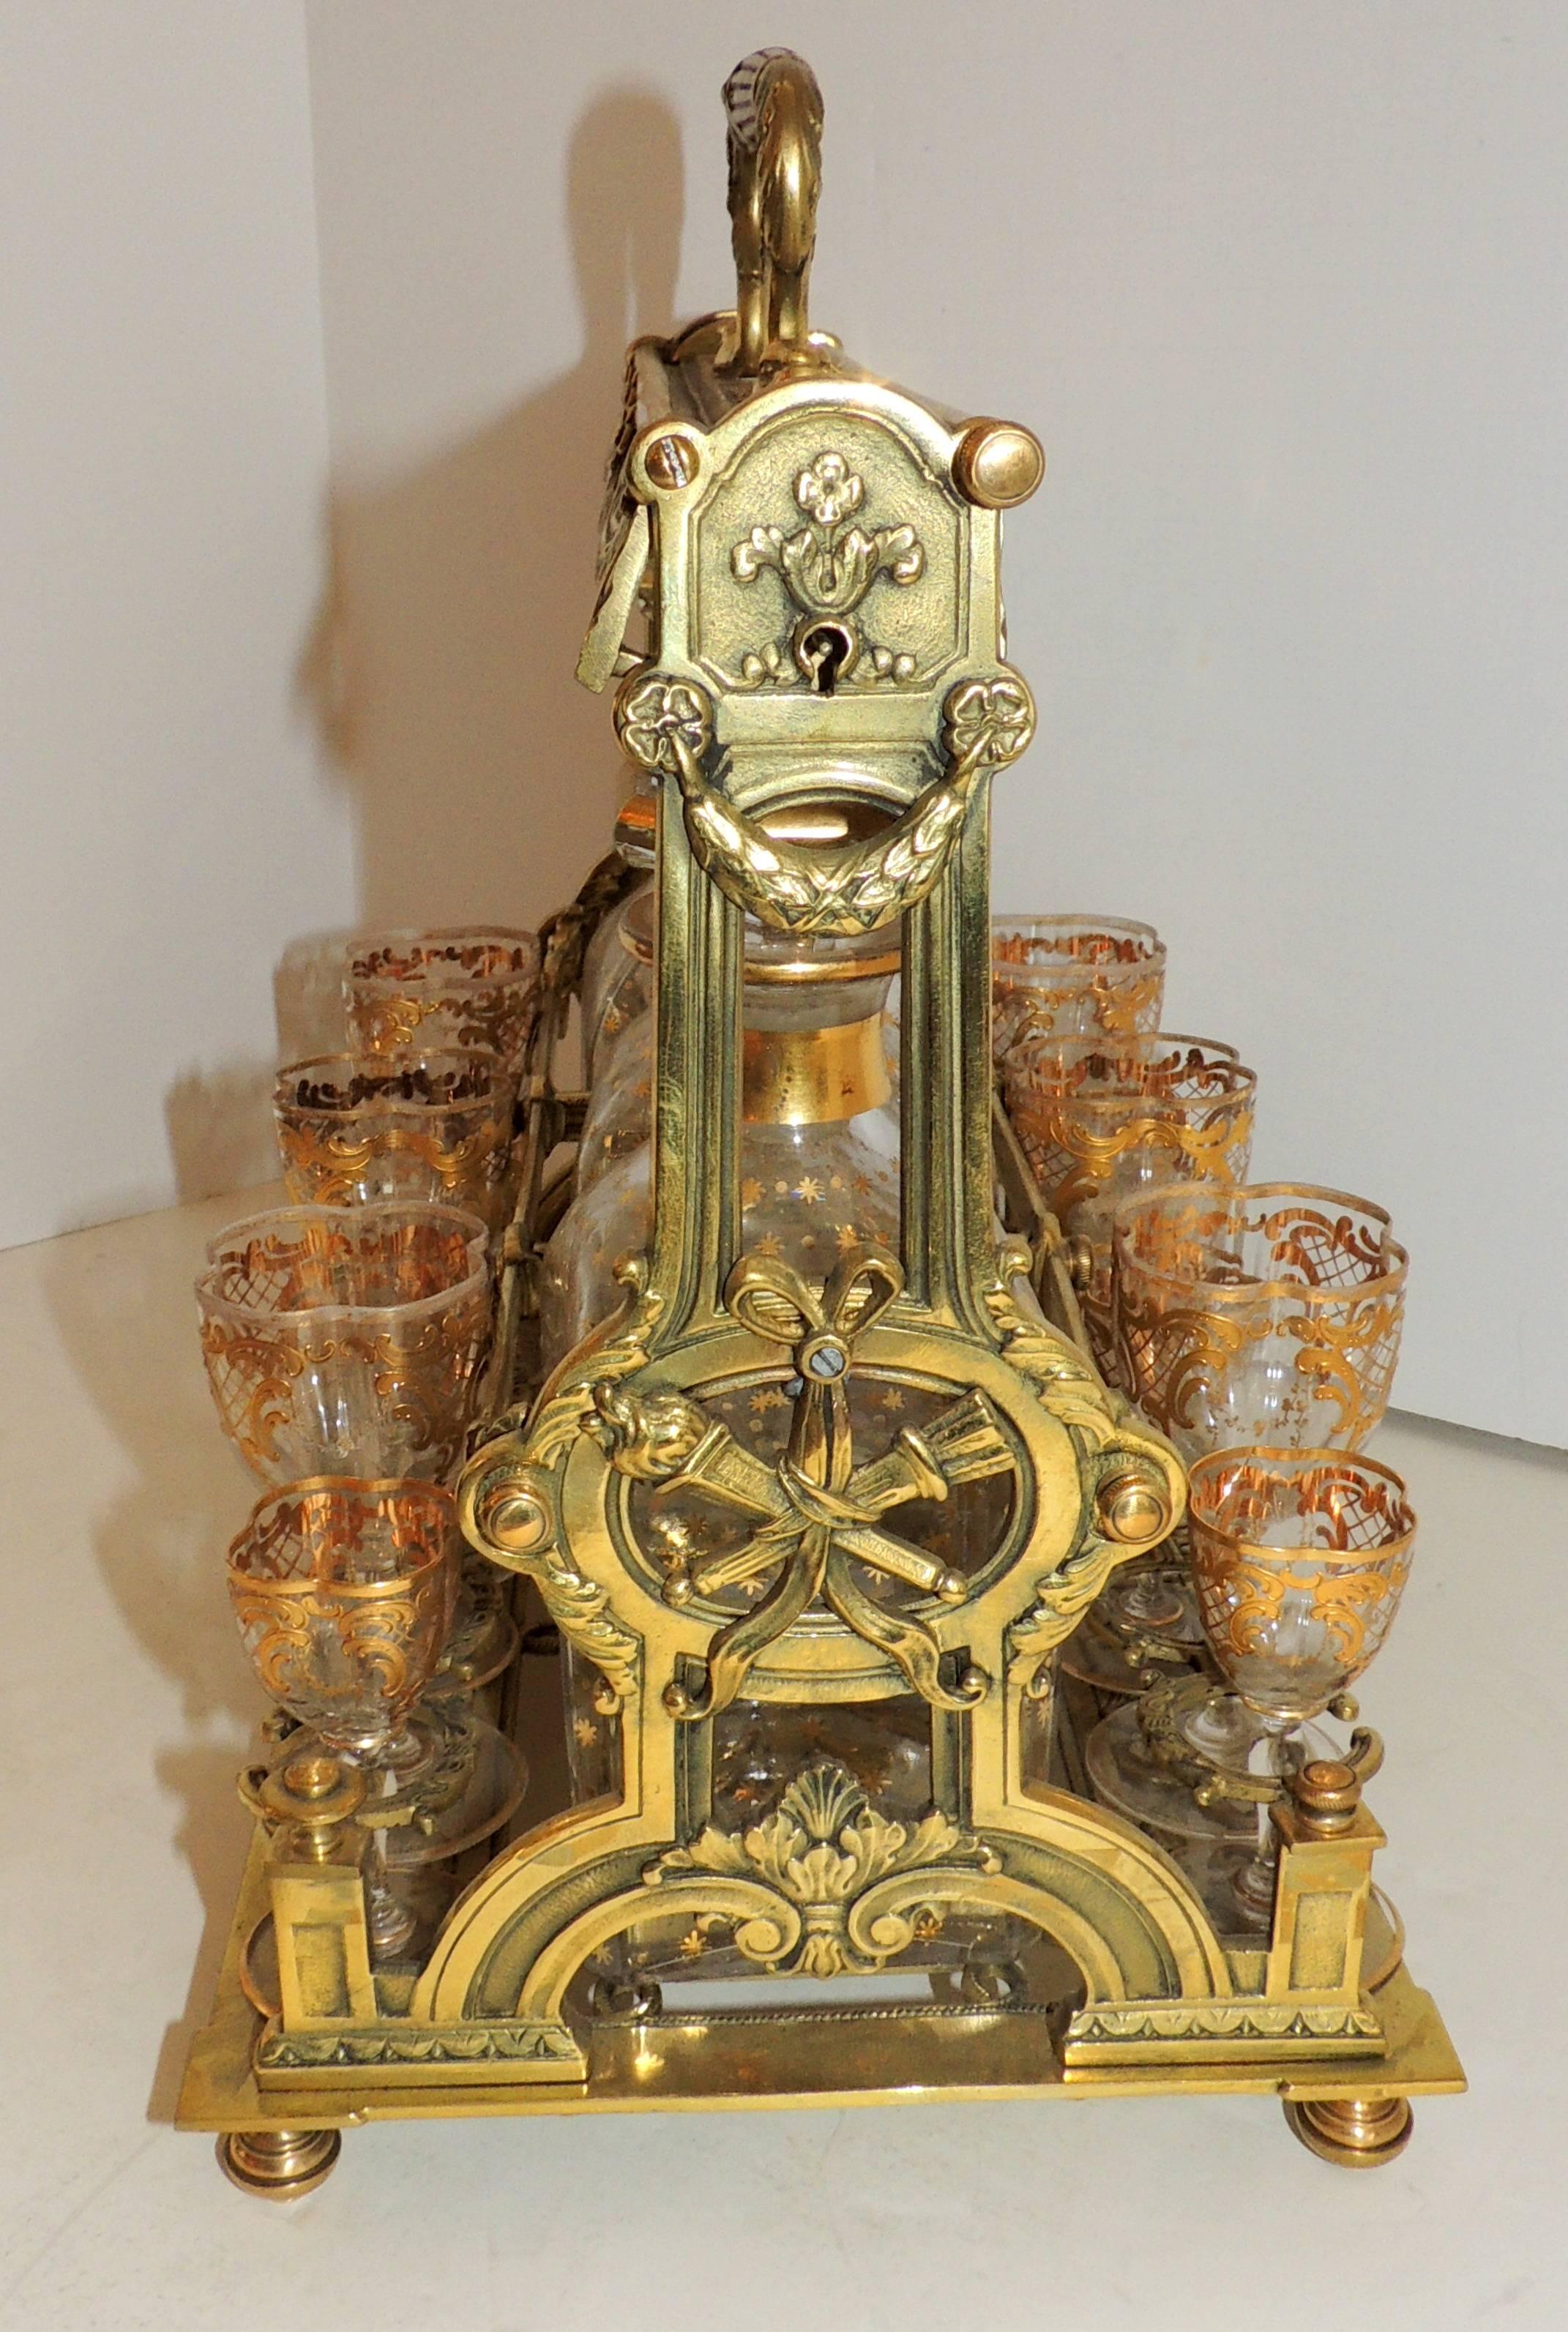 Hand-Painted Wonderful French Bronze Bow Swag Crystal Tantalus Liquor Decanter Bar Ware Set